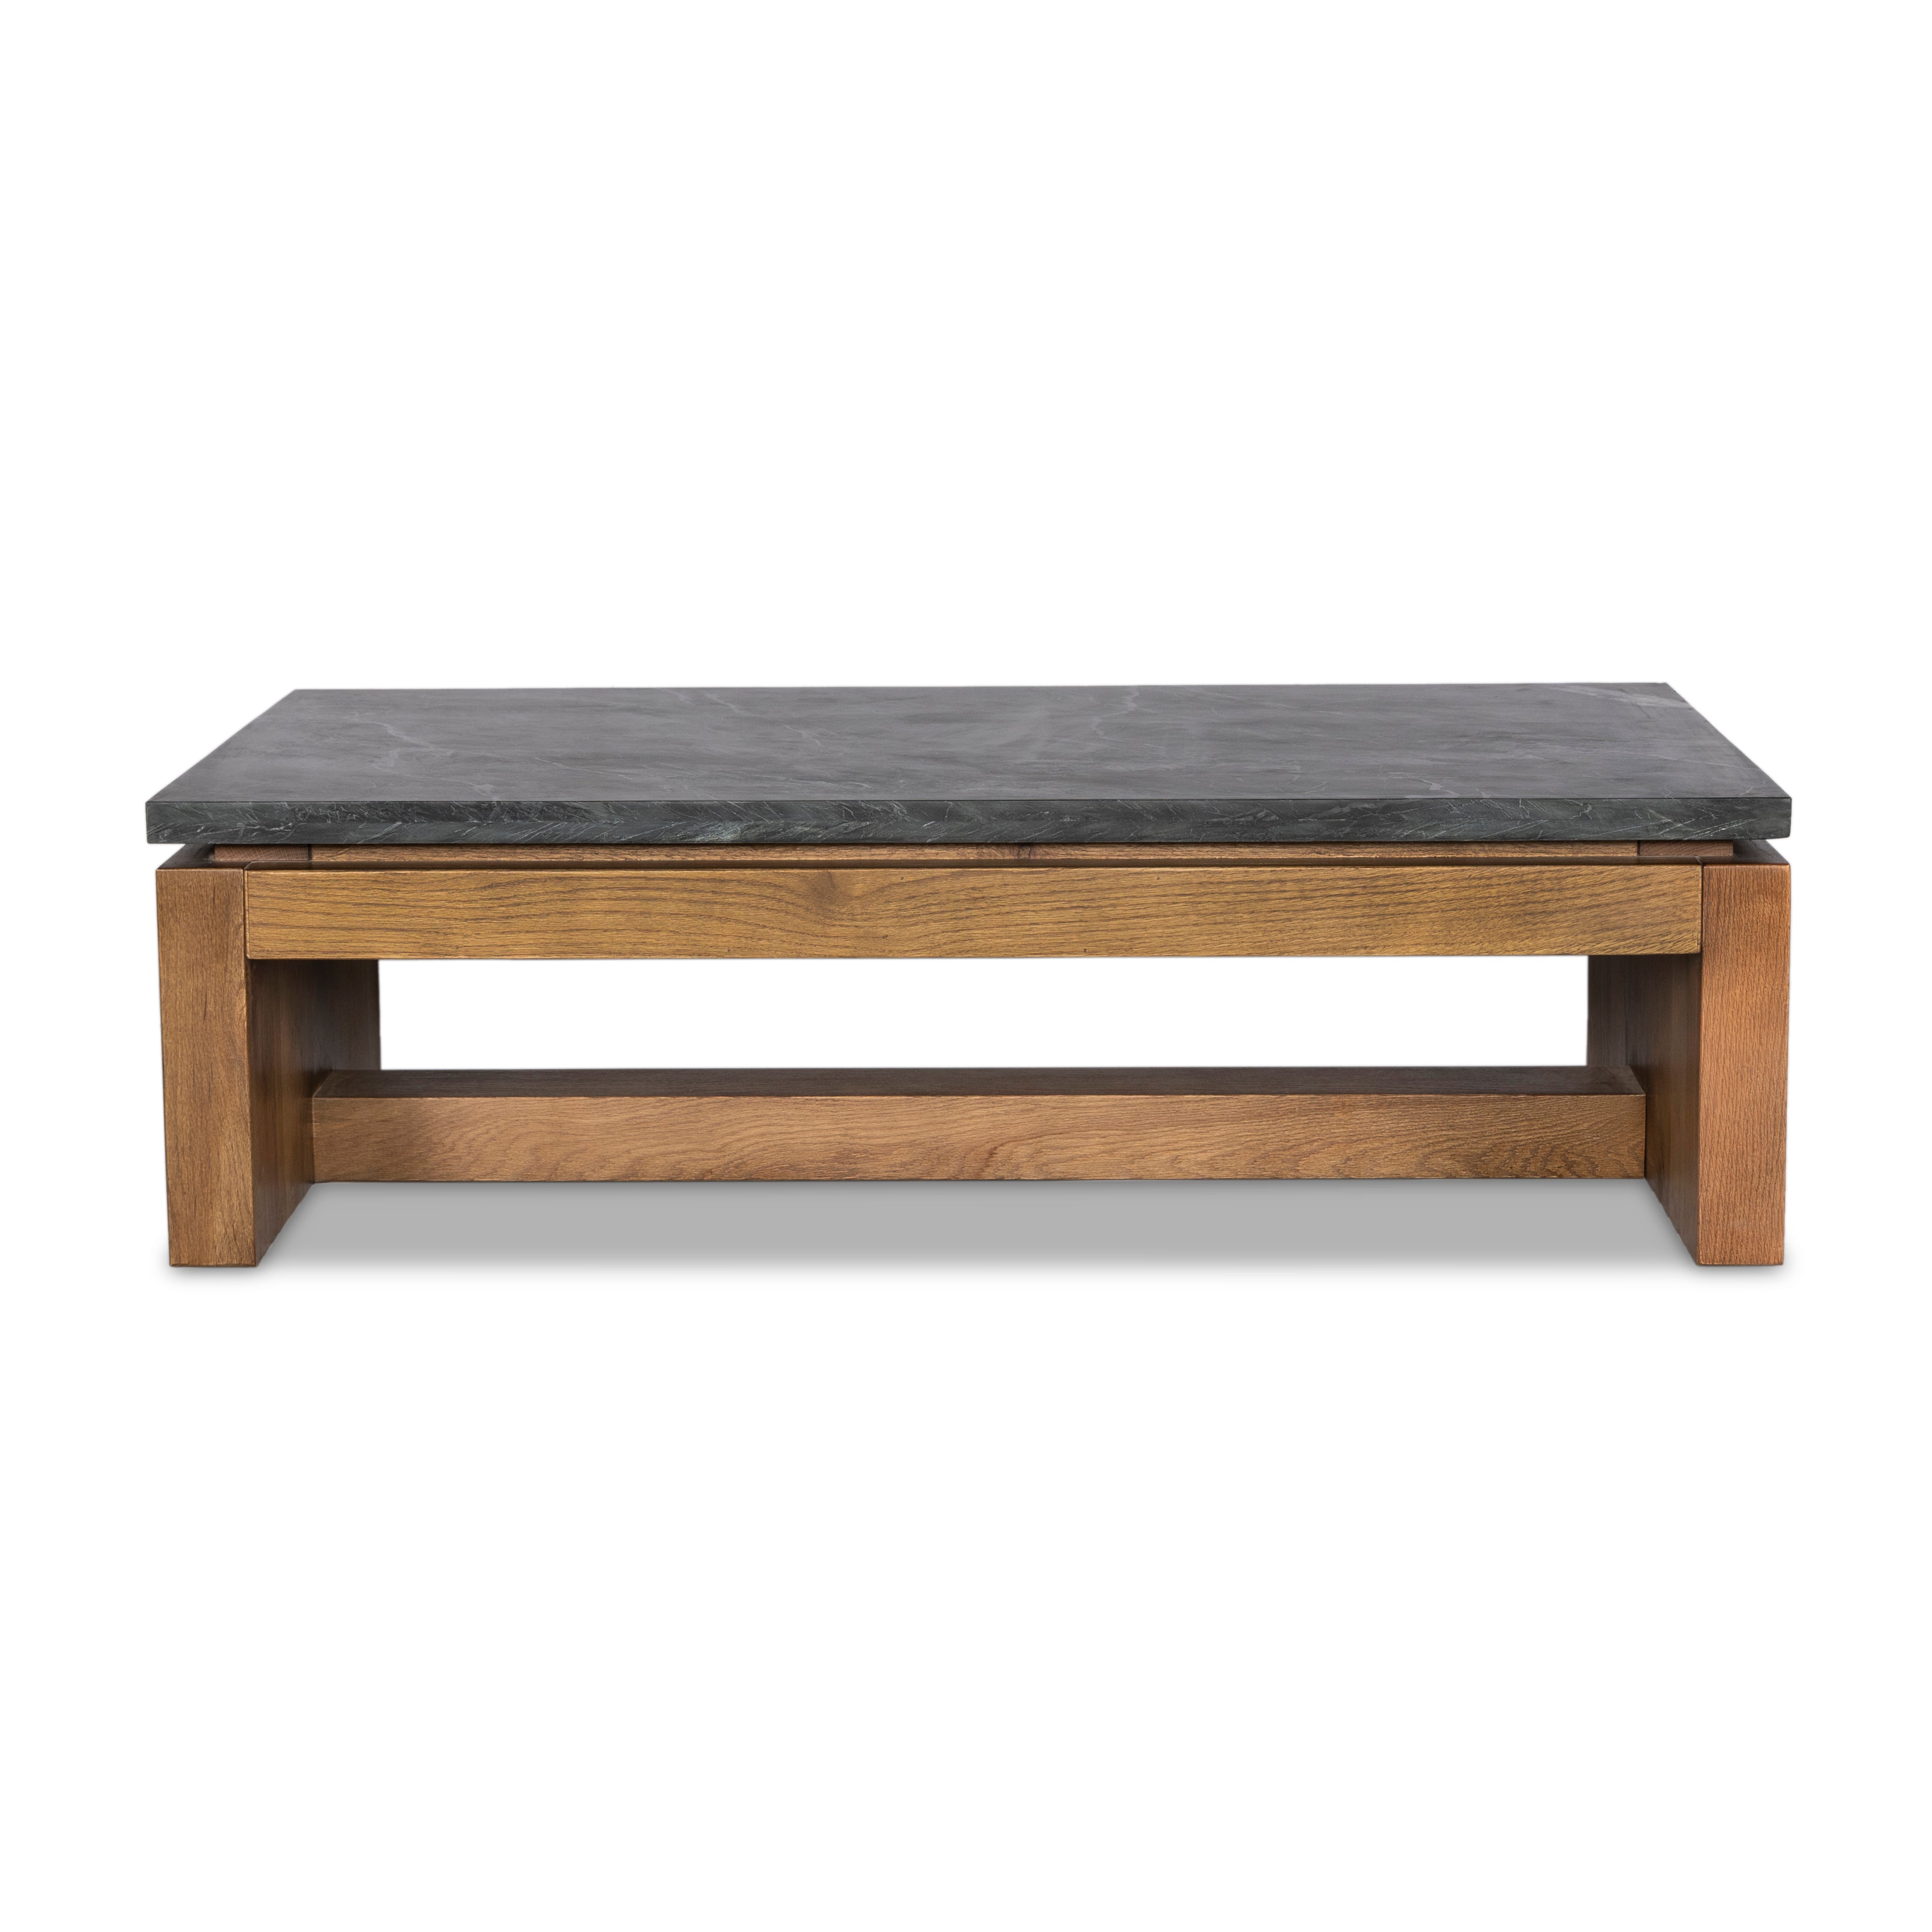 Mixed materials update this waterfall-style coffee table, as a warm oak base pairs with a sleek black marble tabletop. Amethyst Home provides interior design, new construction, custom furniture, and area rugs in the Omaha metro area.